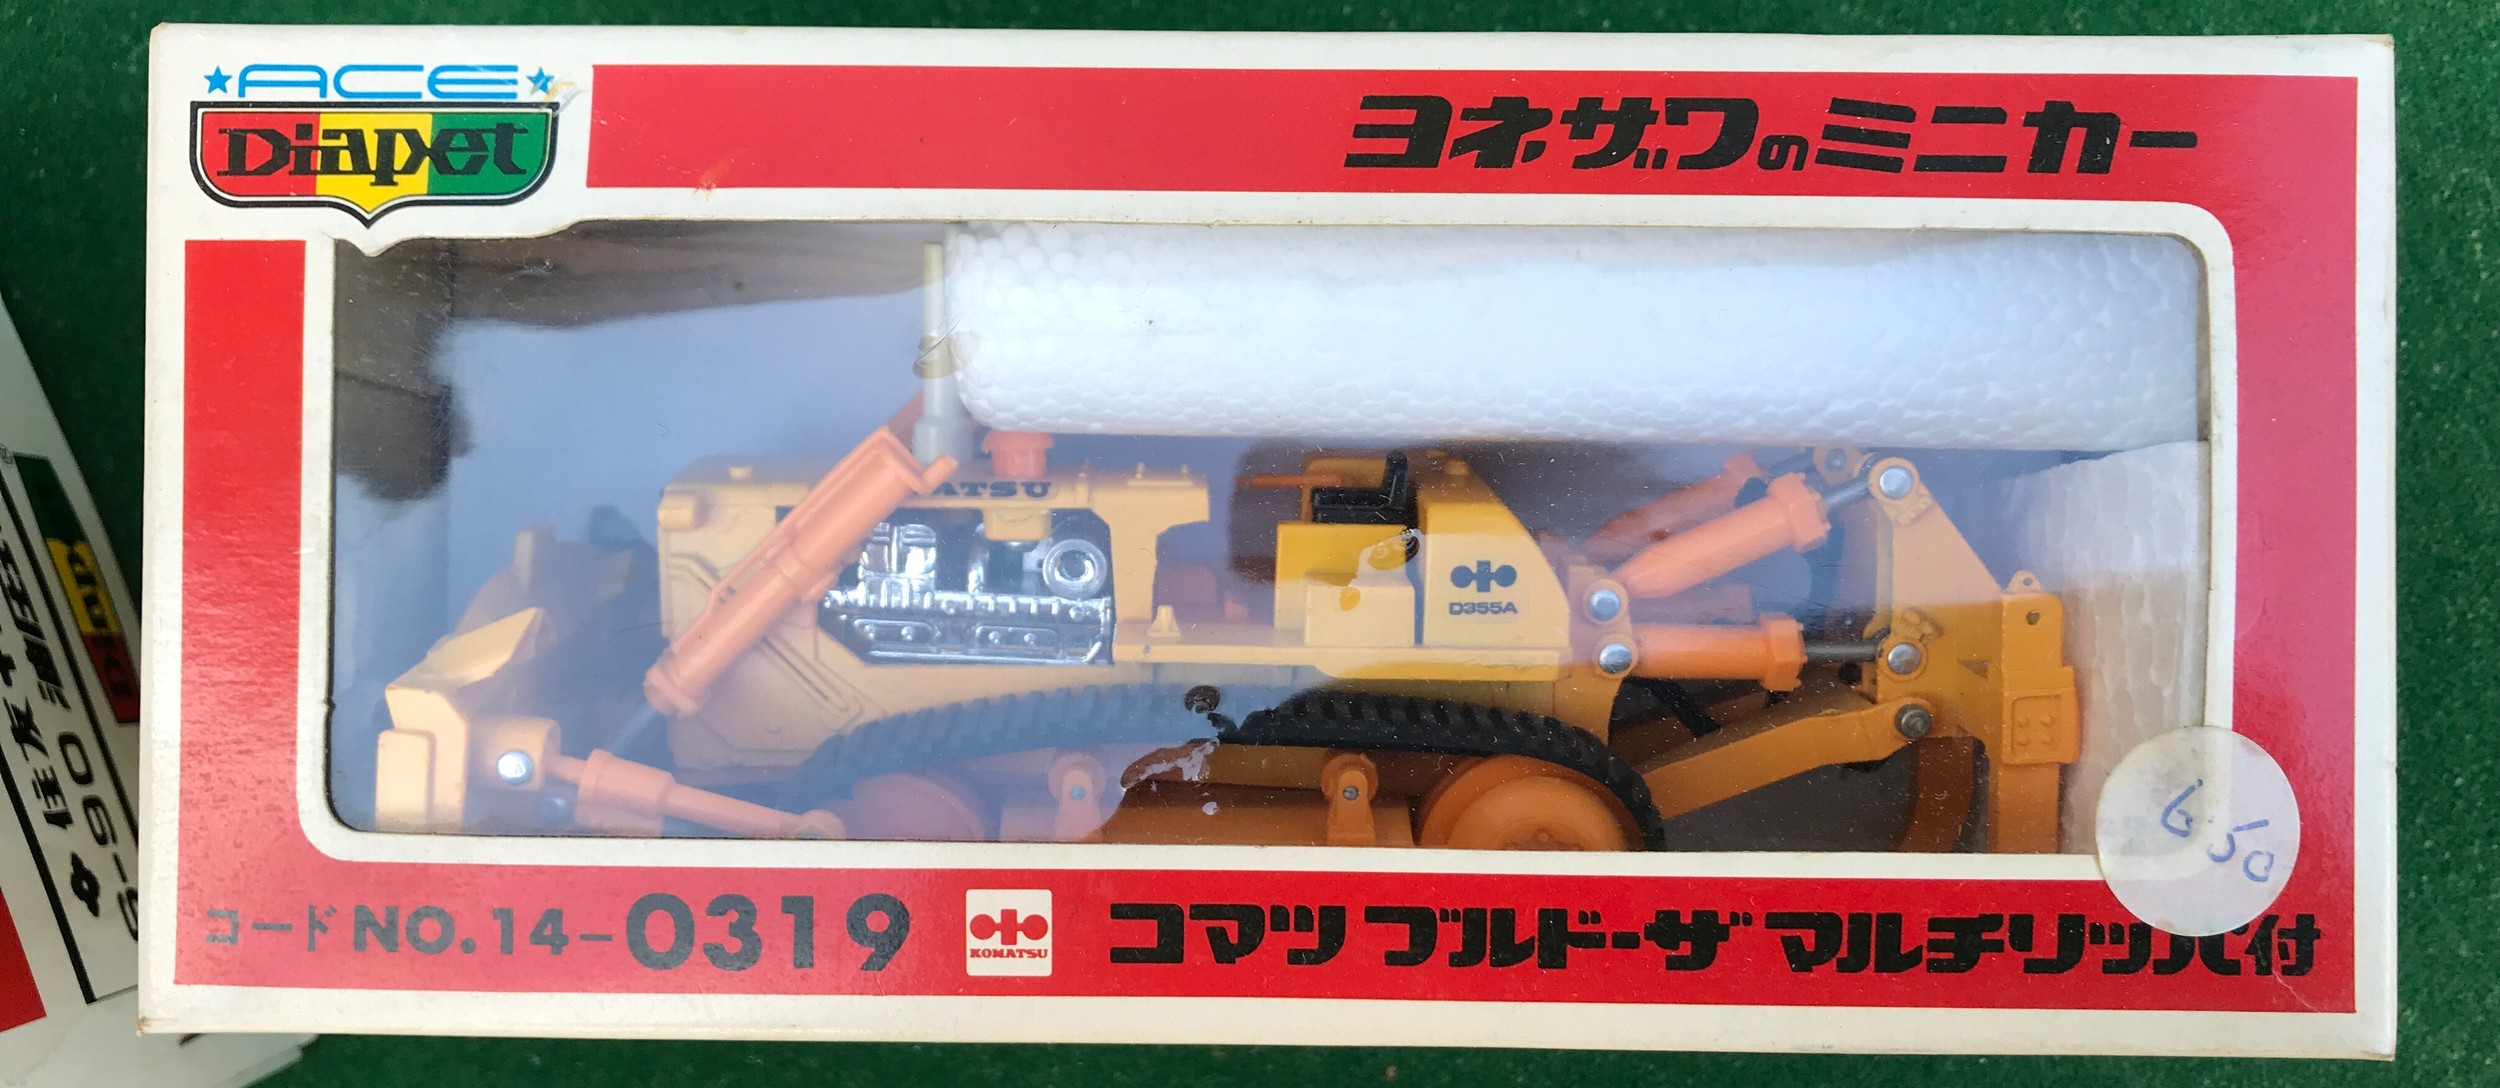 5 x Diapet diecast models to include 01723 K-10 Mitsubishi Fuso Power Bucket Truck, 01482 K-37 S- - Image 3 of 4